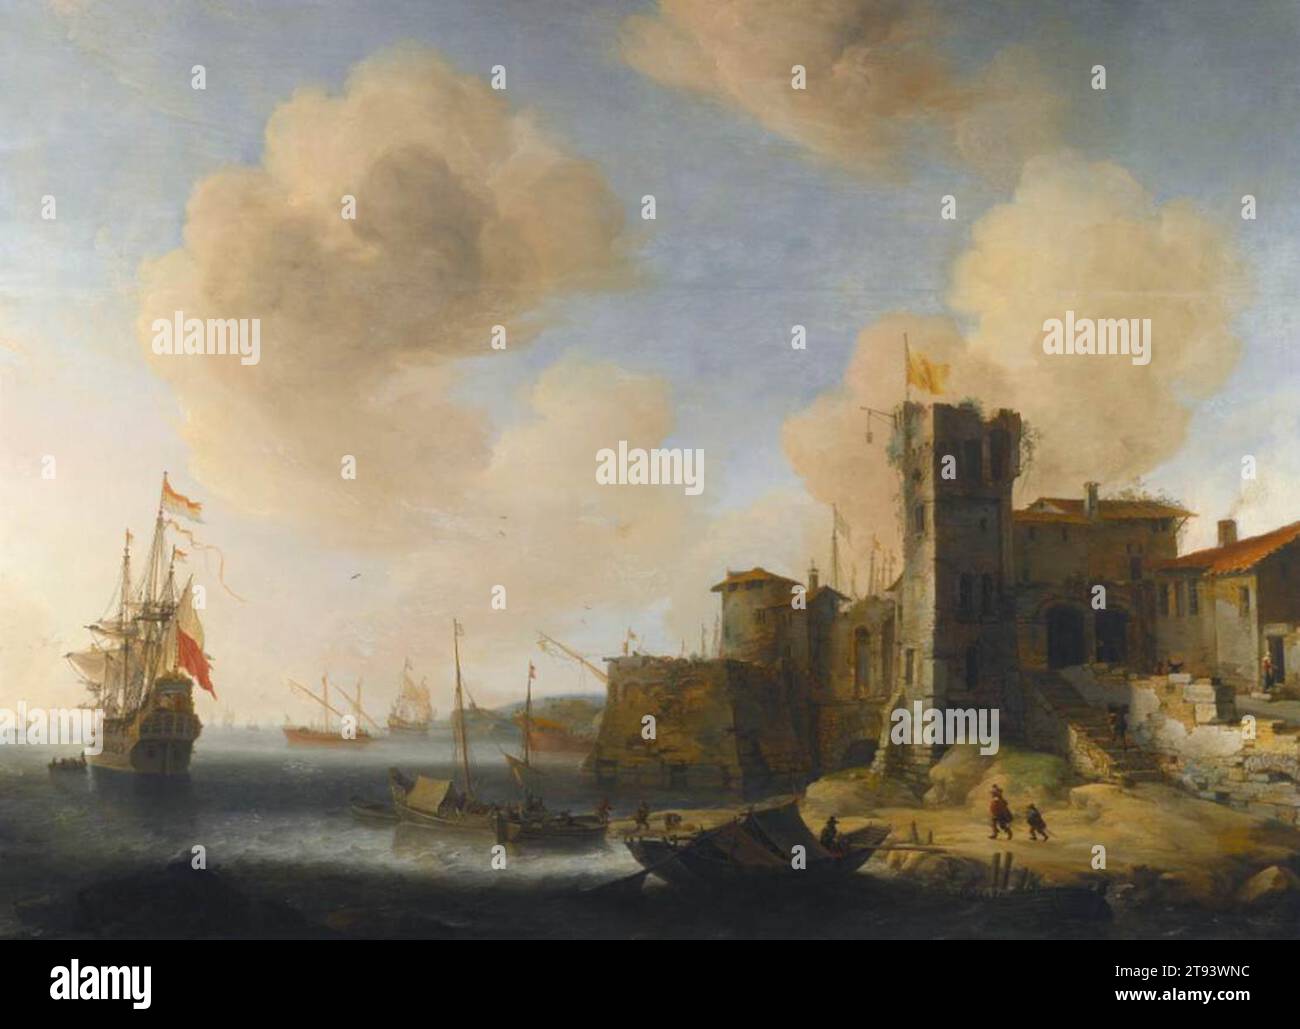 Mediterranean Harbour, with the Dutch Vessel Profeet Elias at Anchor 1650 by Jan Abrahamsz. Beerstraten Stock Photo